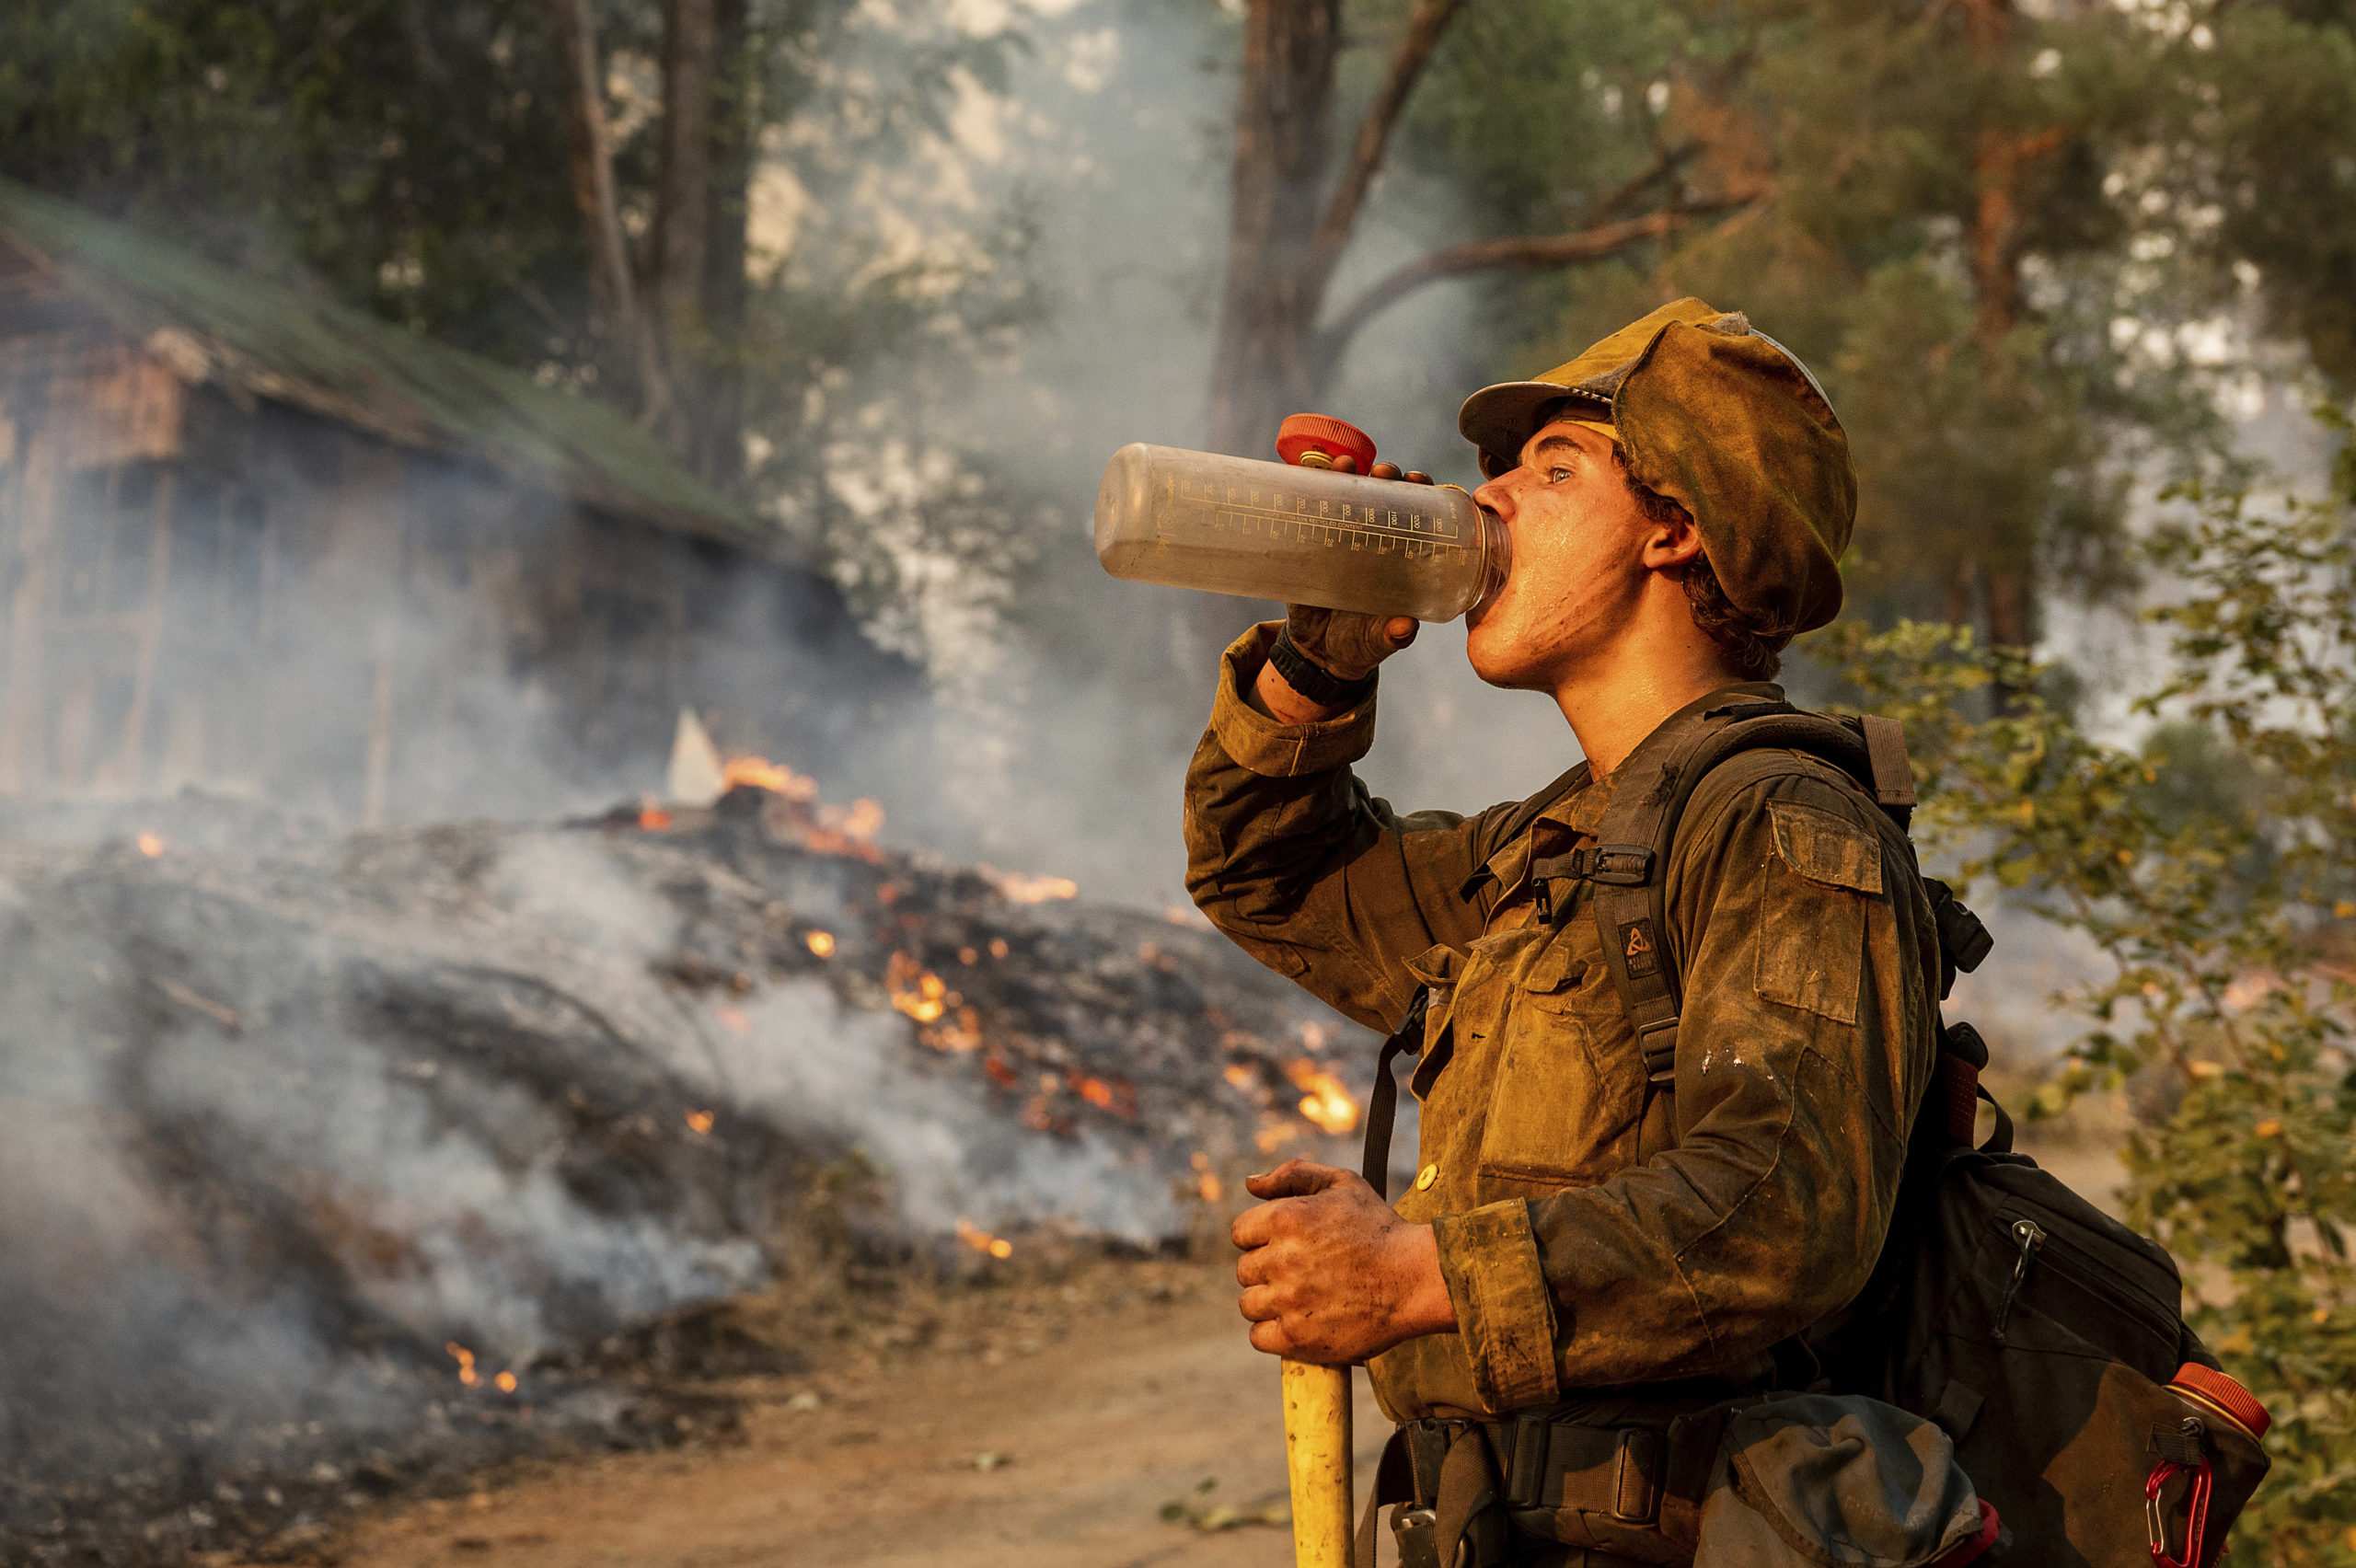 Firefighter Trapper Gephart of Alaska's Pioneer Peak Interagency Hotshot crew takes a drink while battling the Mosquito Fire in the Volcanoville community of El Dorado County, California, on Friday.